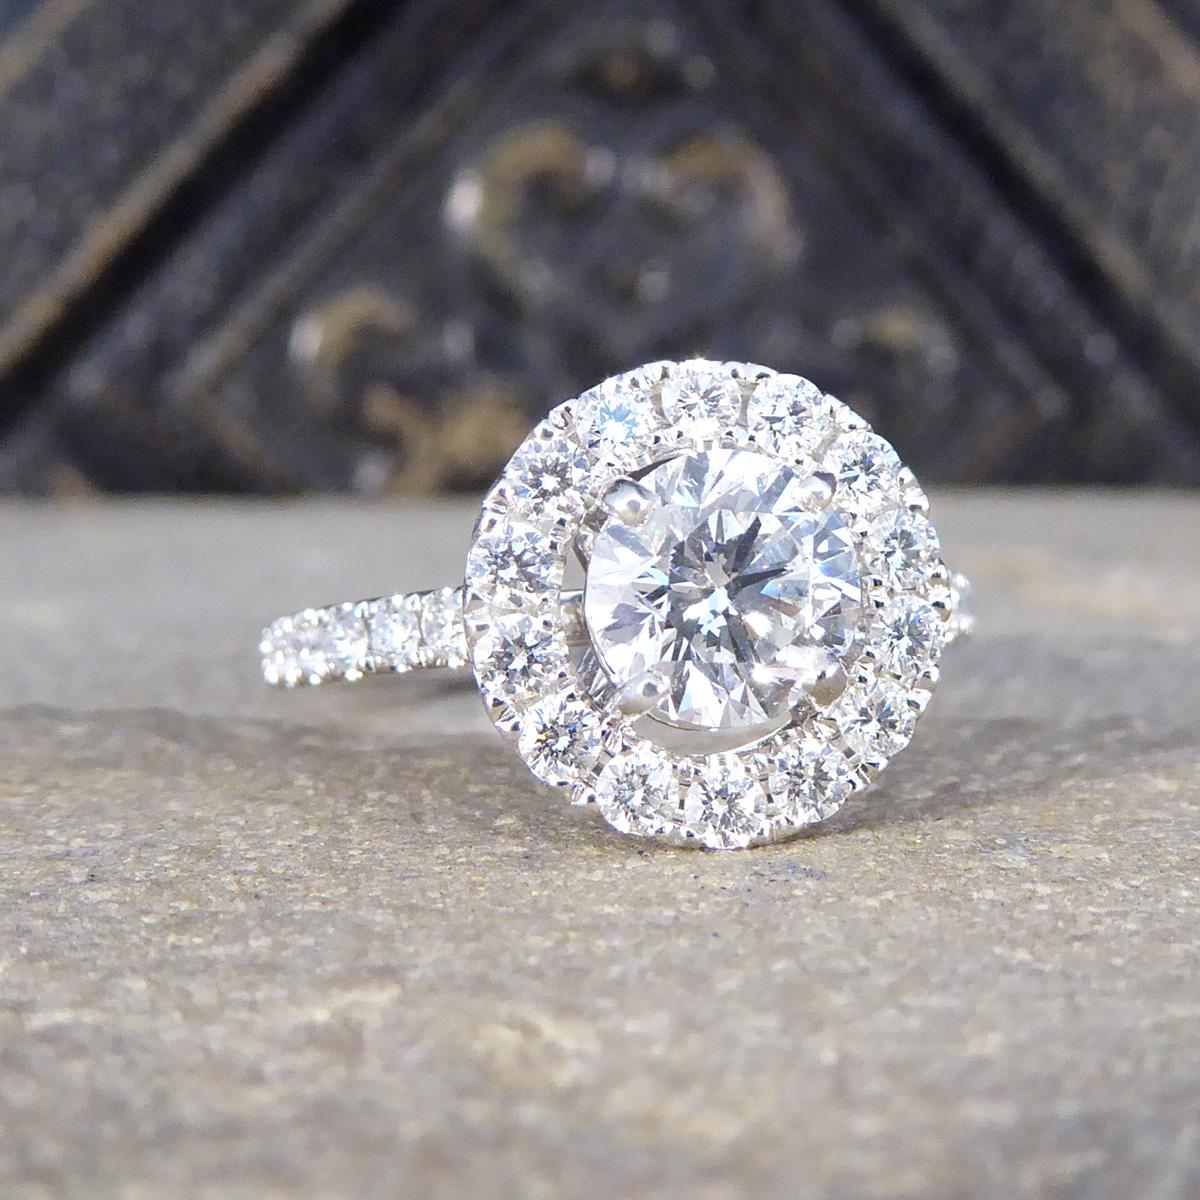 A beautiful and bright Diamond halo cluster ring set in platinum. This exquisite piece features a stunning 1.04ct re-homed stone at its centre, cut to perfection in a Brilliant Cut style, giving it the second hand price appeal with a brand new